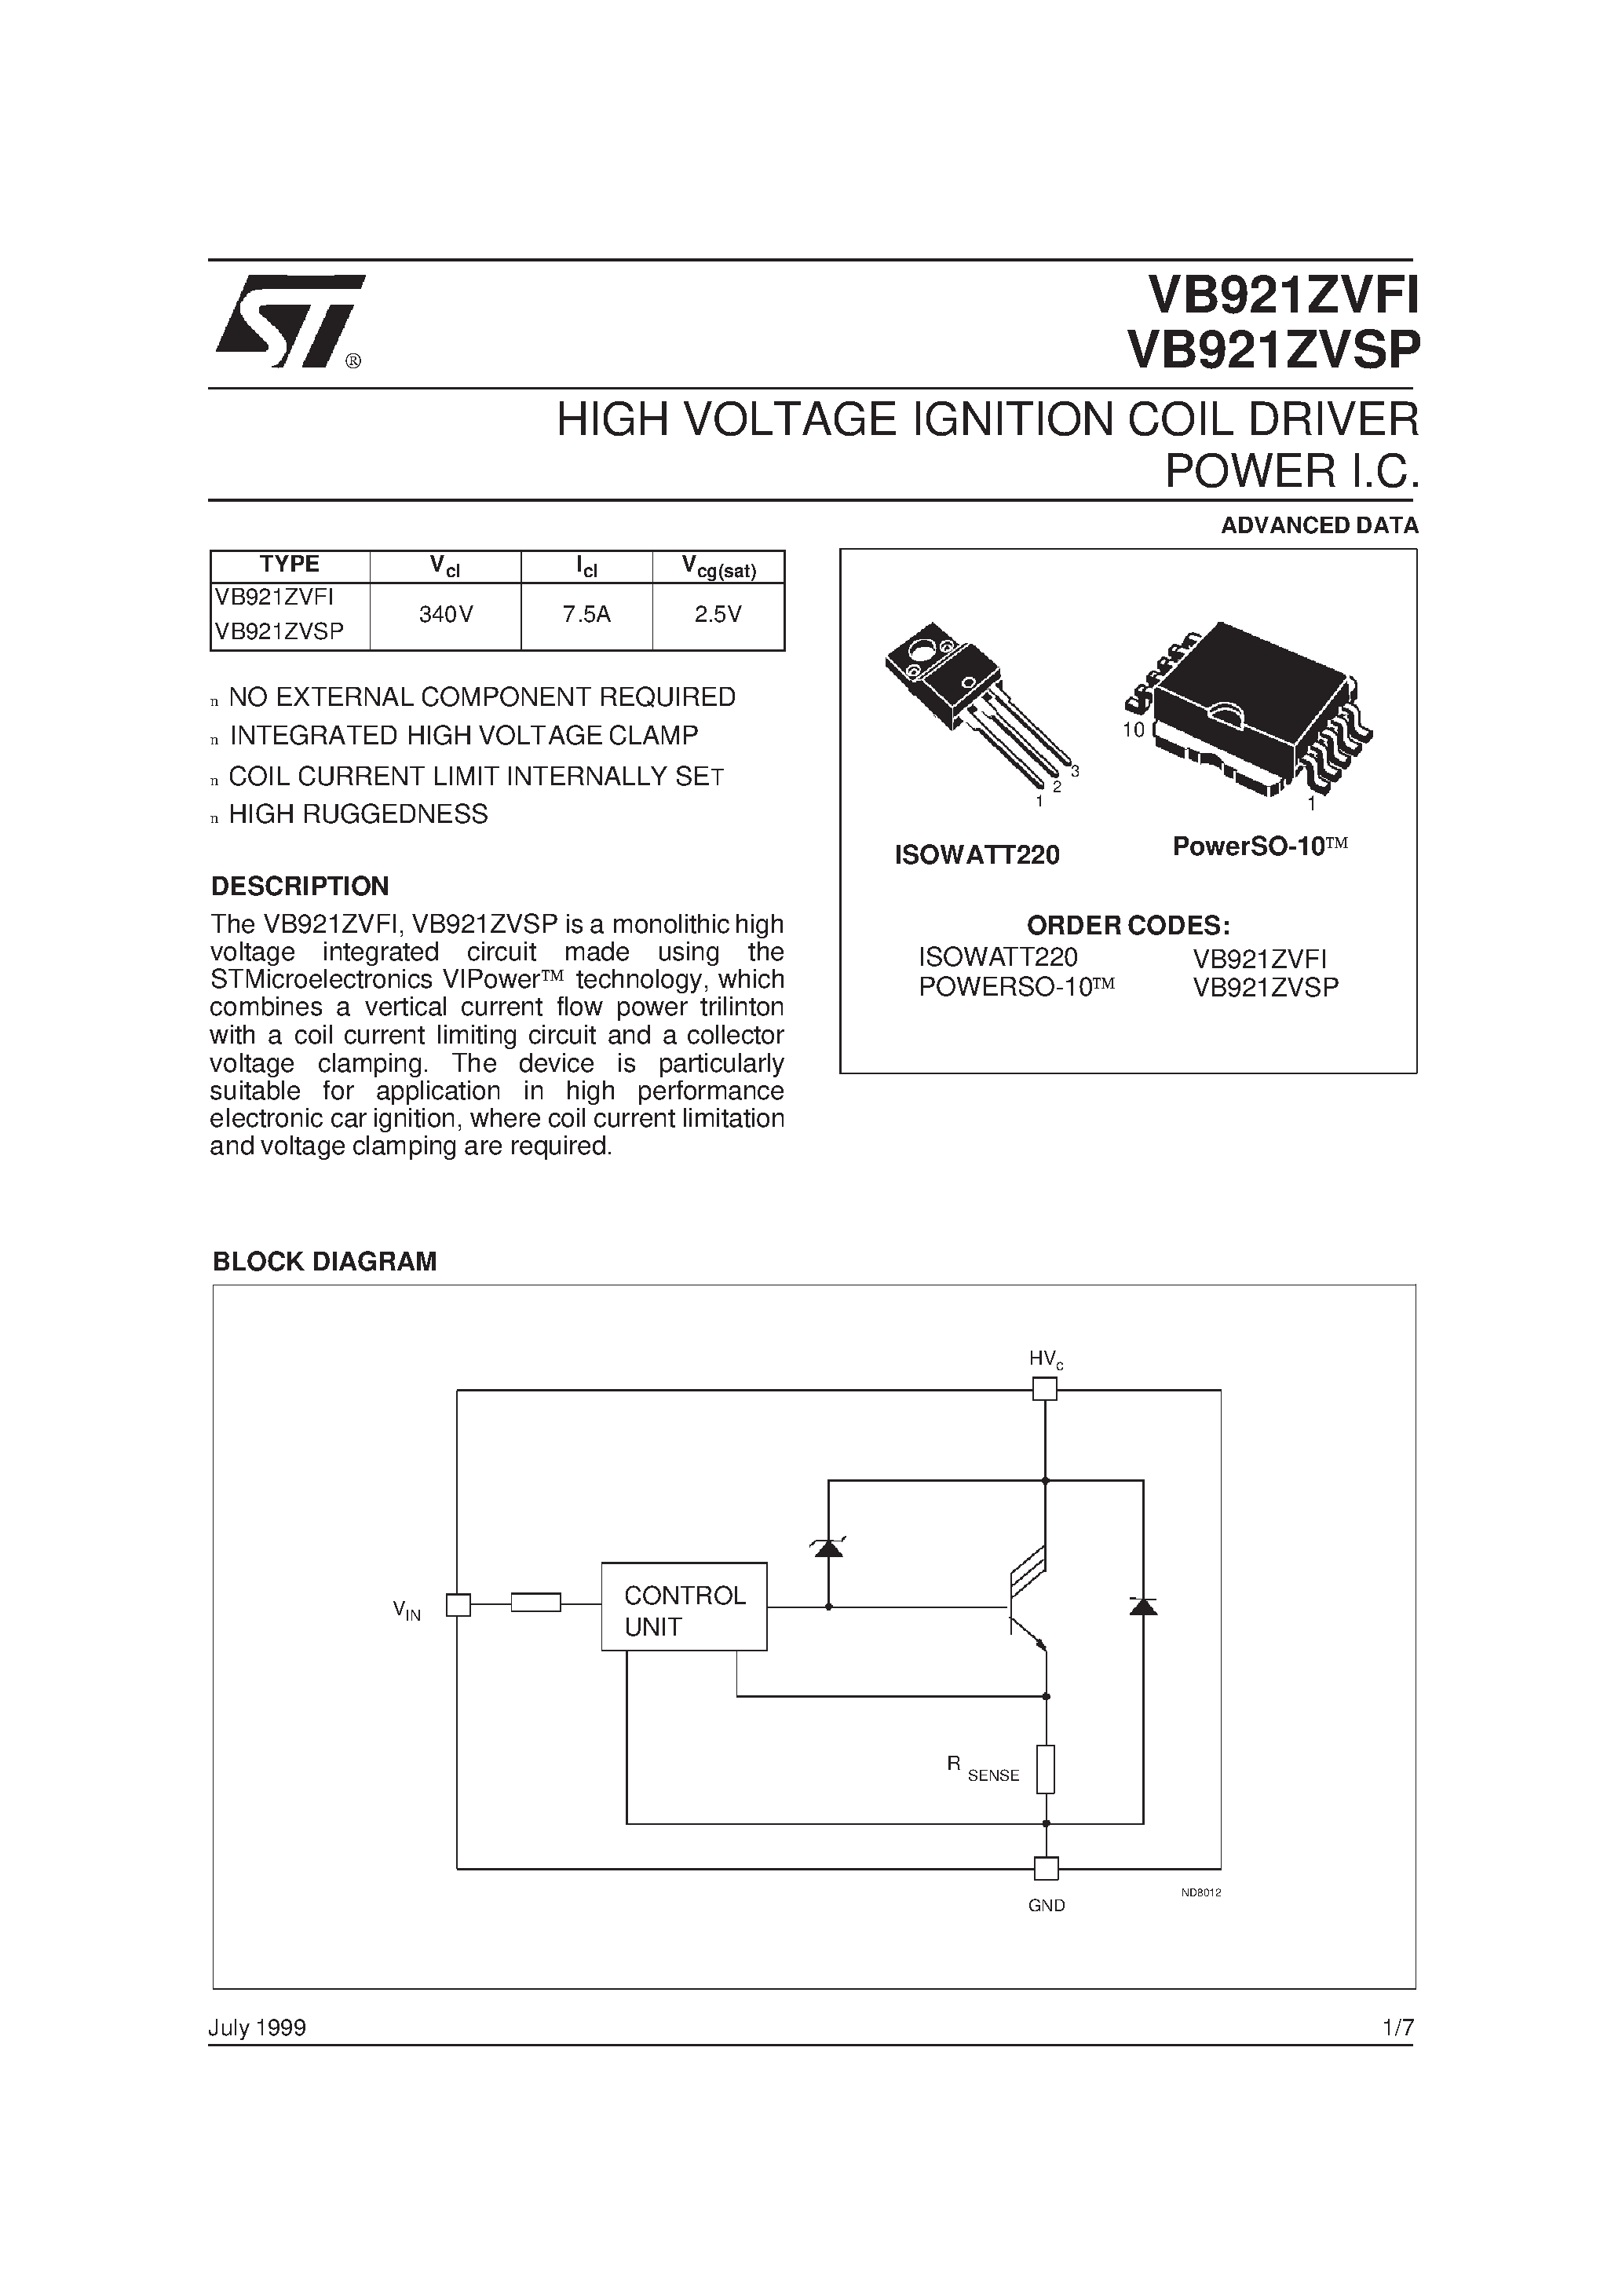 Datasheet VB921 - HIGH VOLTAGE IGNITION COIL DRIVER POWER I.C. page 1